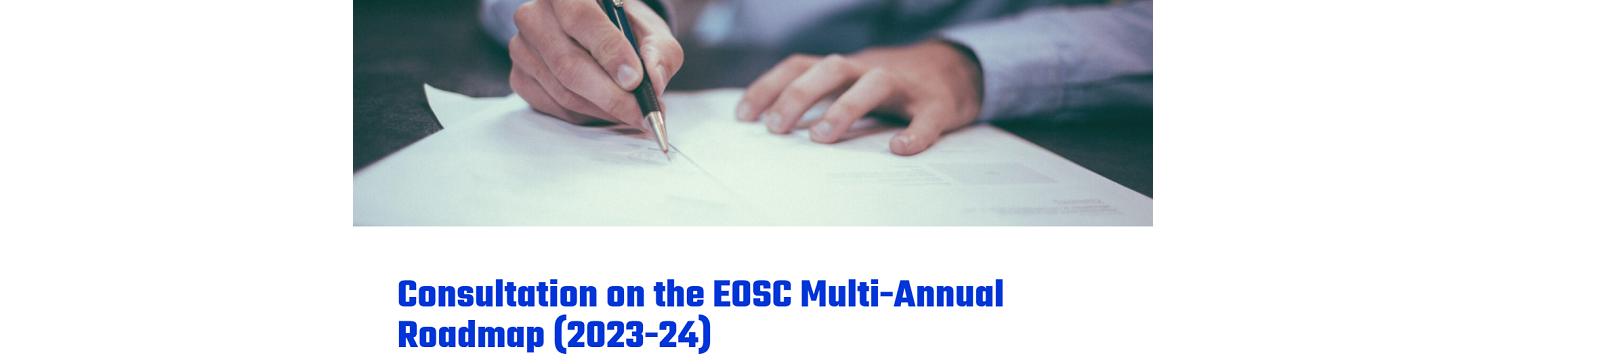 EOSC Association launched a consultation for the Multi-Annual Roadmap